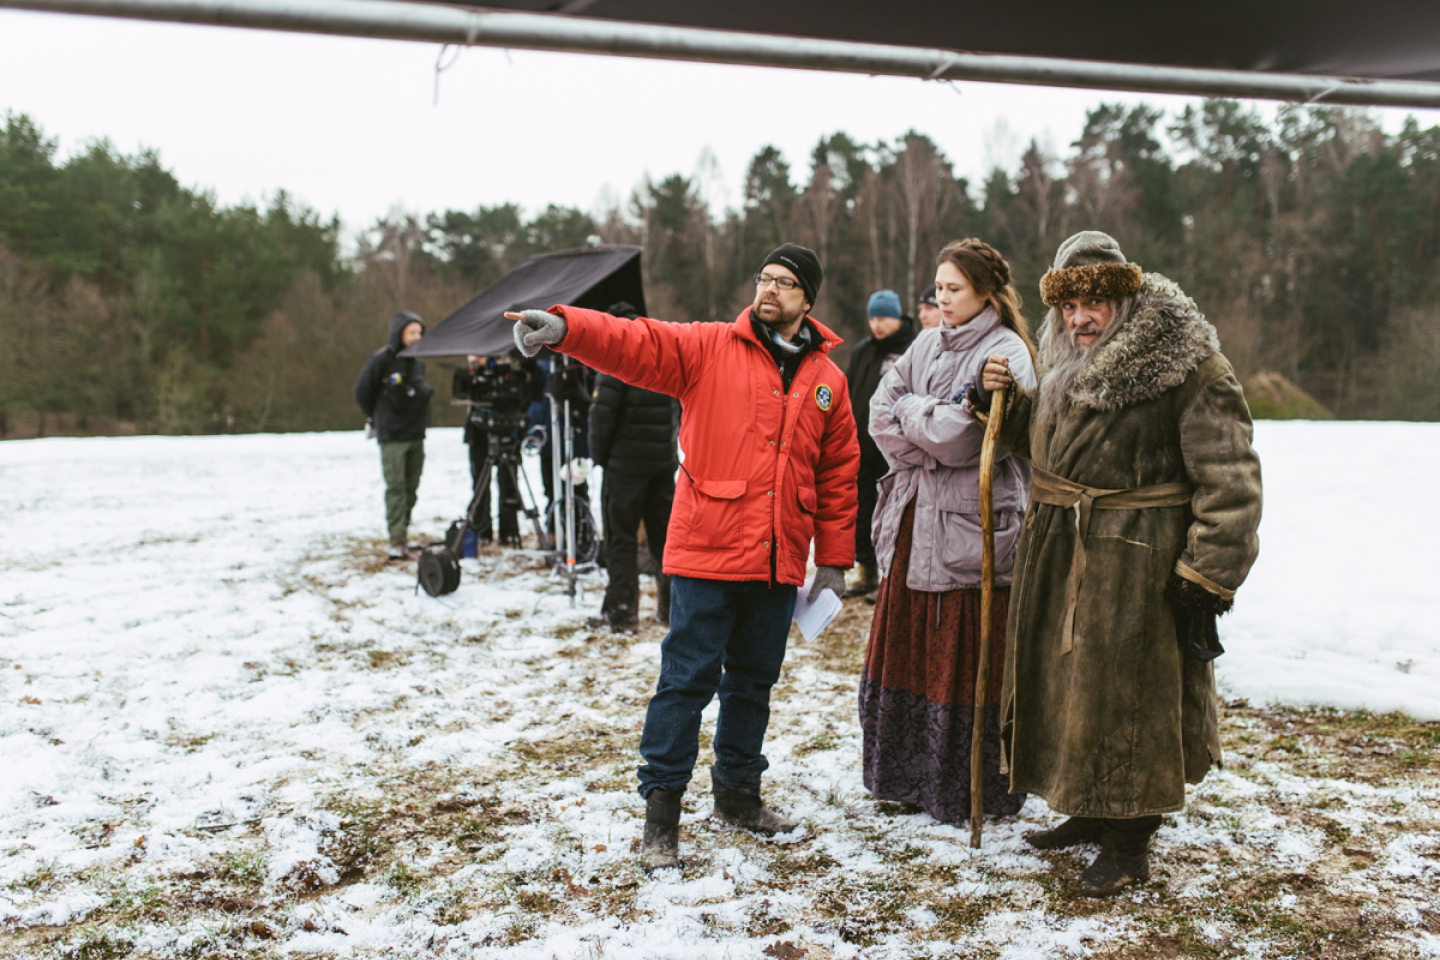 Outdoor winter film shoot with camera equipment; in foreground 1 crew member points next to 2 actors in large coats 